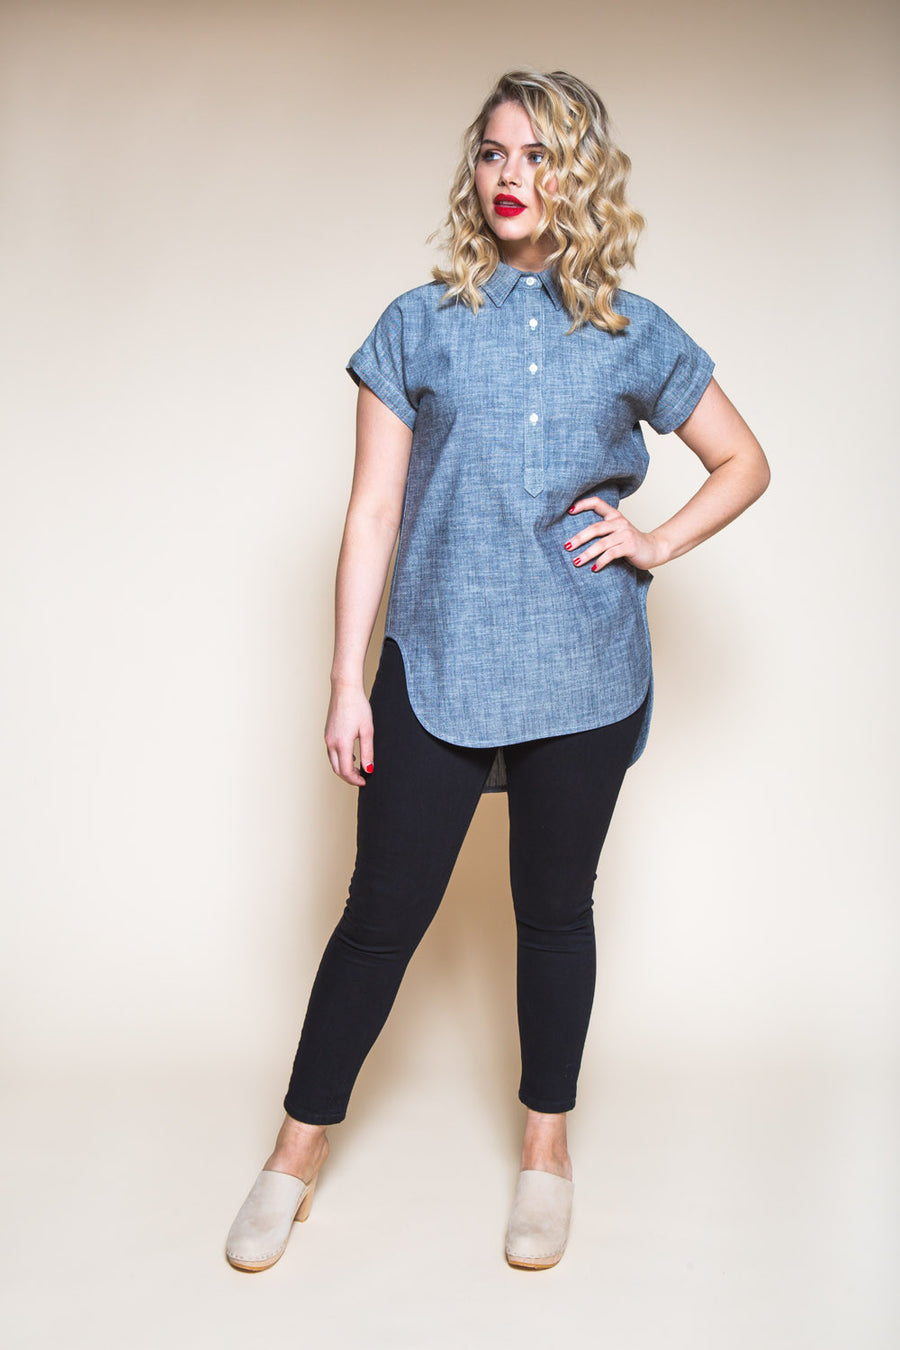 Kalle Button-down Shirt Pattern // Tunic with popover placket // Closet Core Patterns